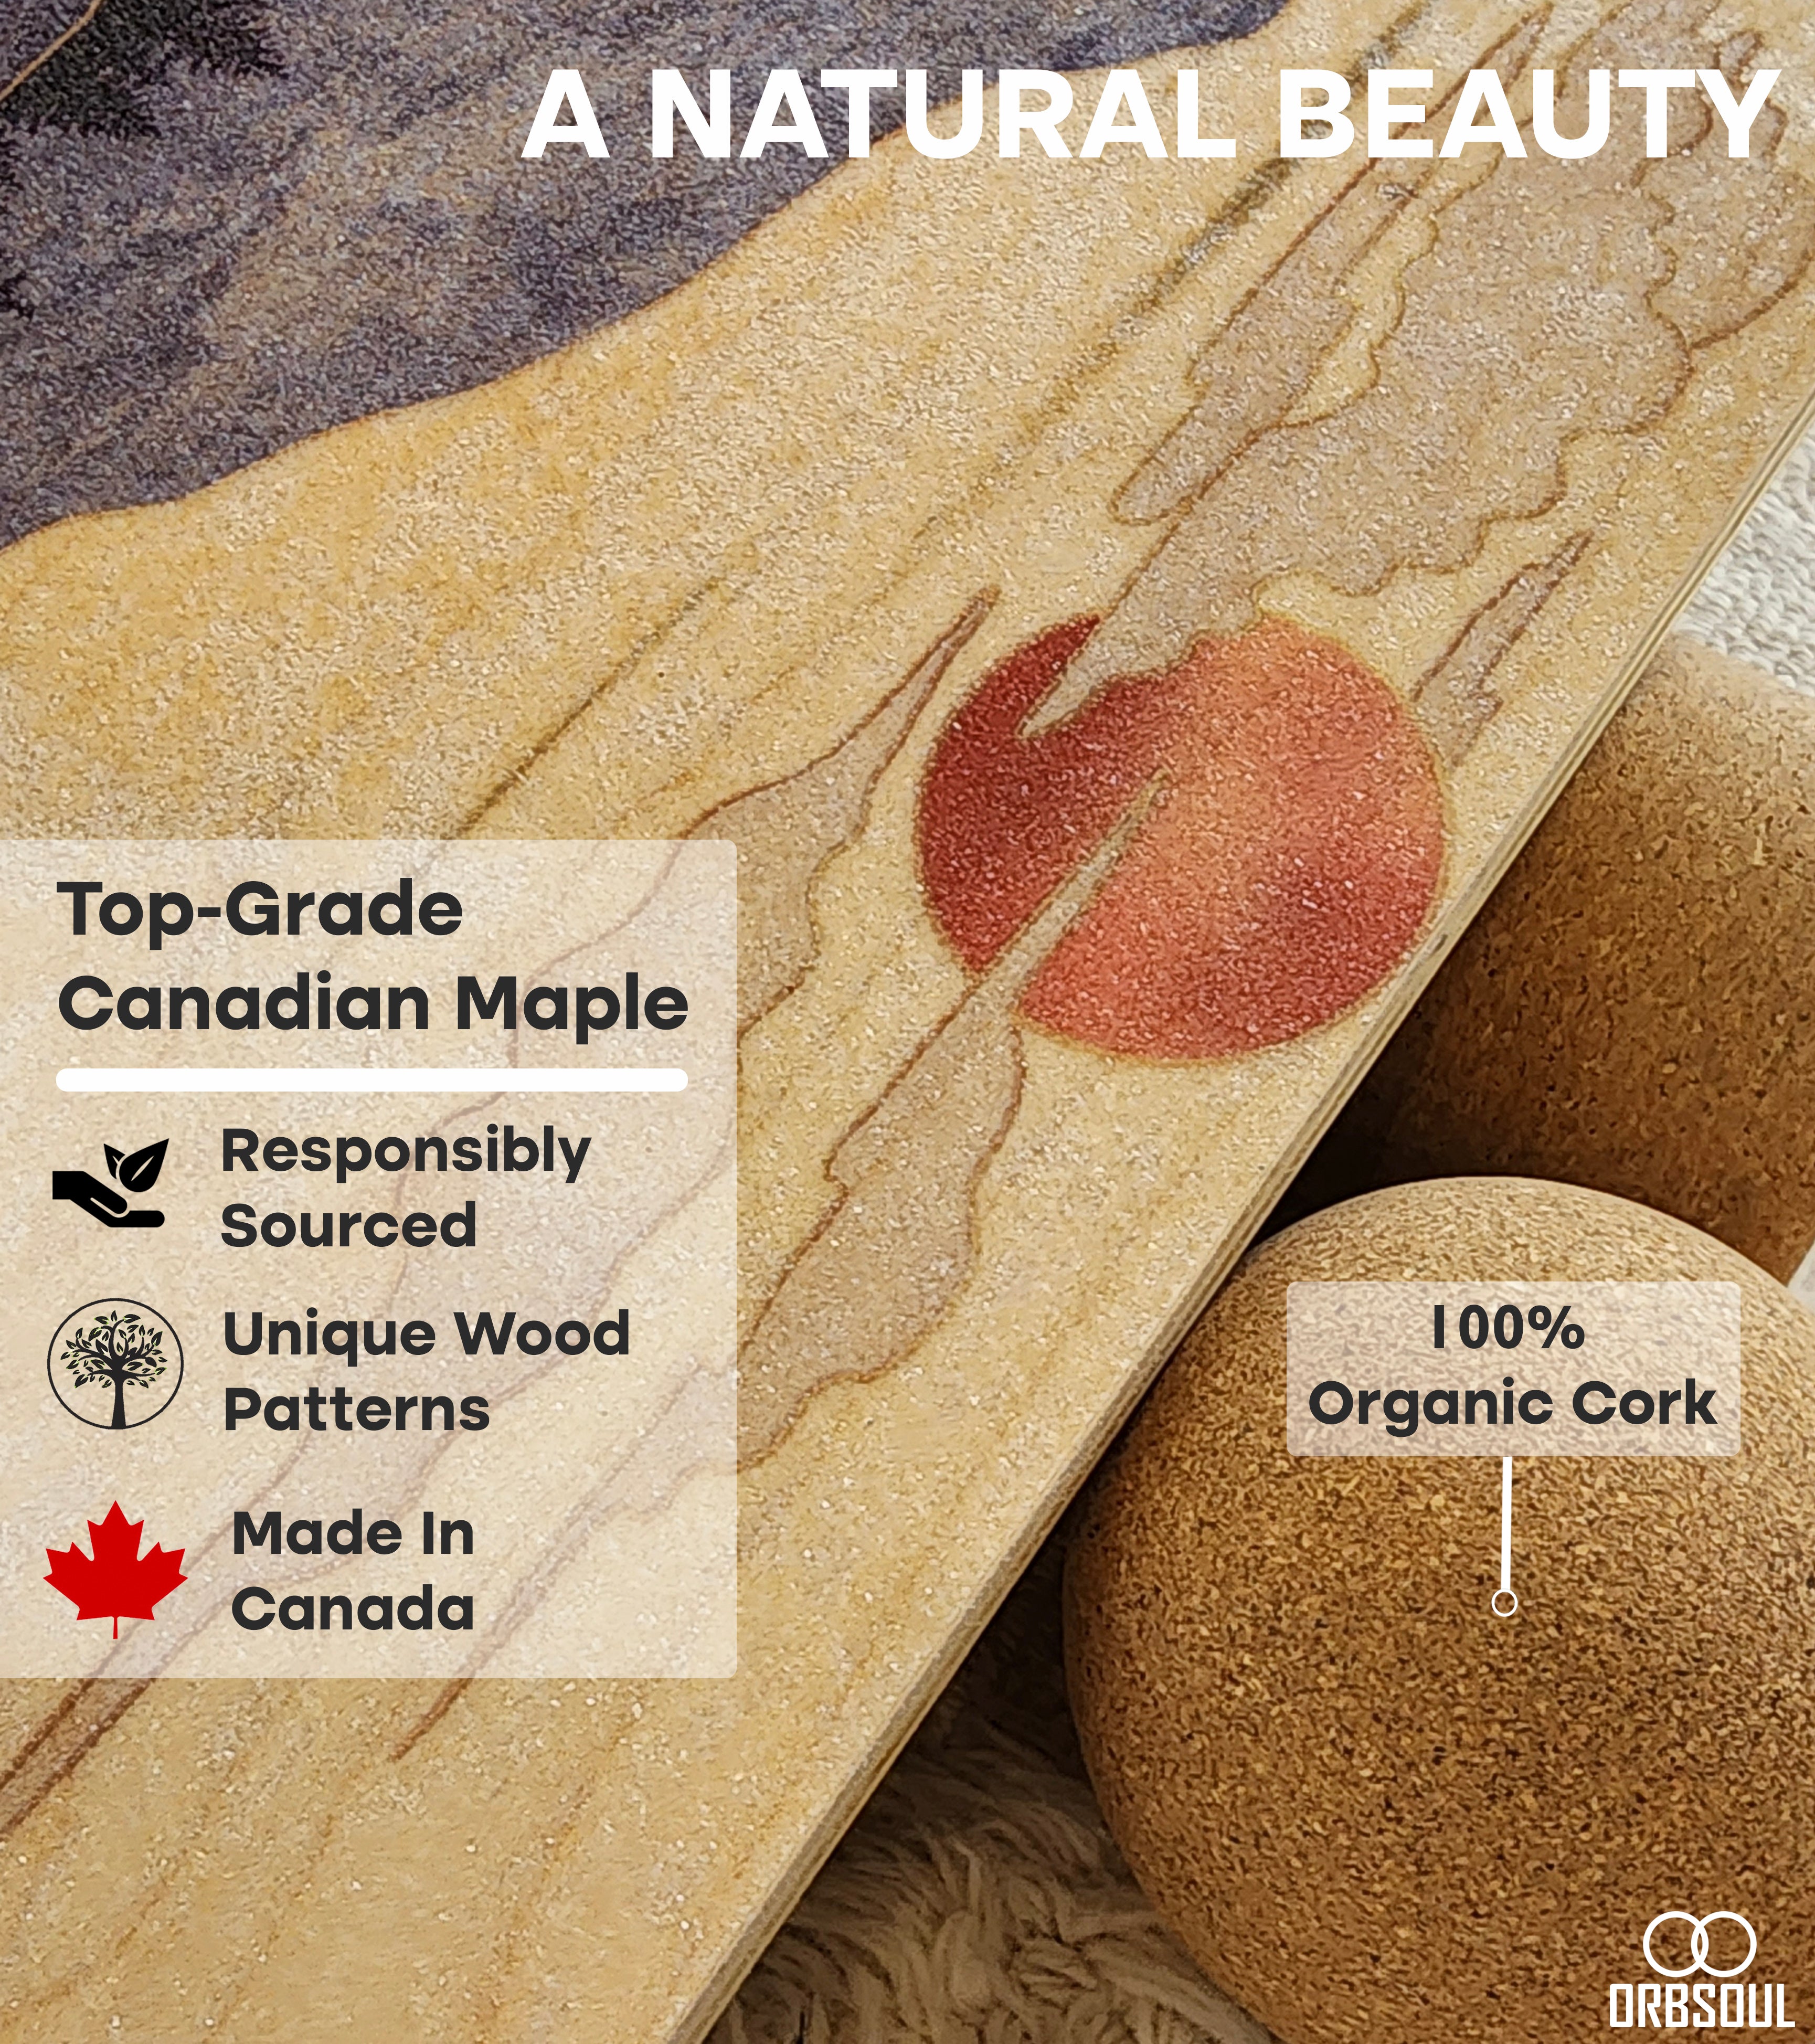 orbsoul core pro balance board. A natural beauty. Handcrafted in Canada with top-grade Canadian Maple.  100% organic cork roller